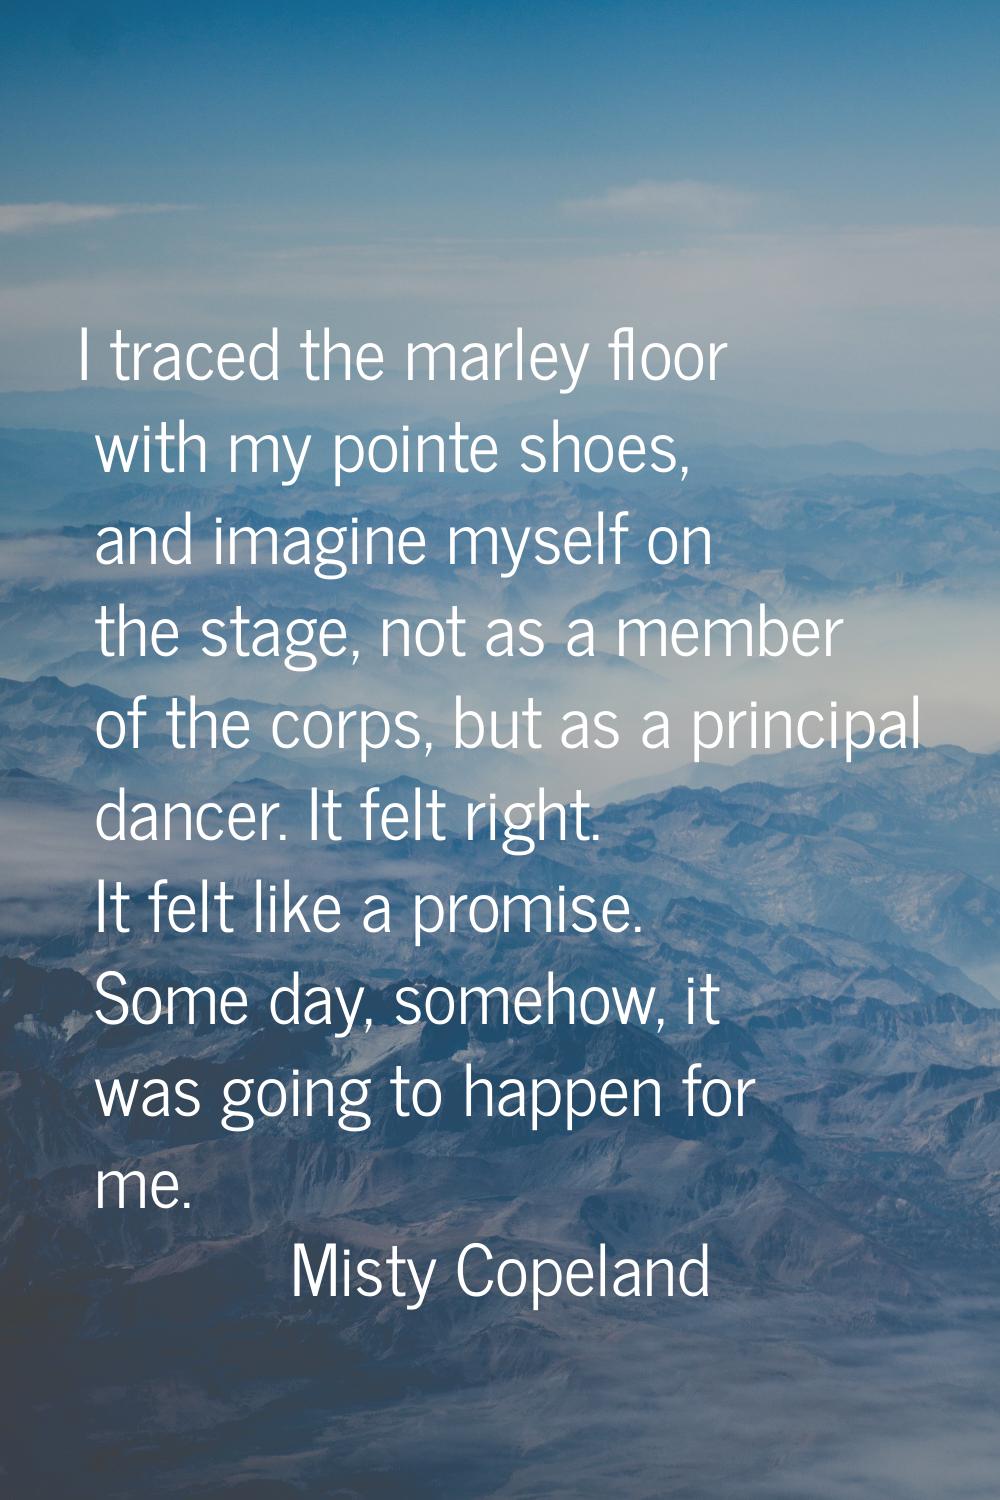 I traced the marley floor with my pointe shoes, and imagine myself on the stage, not as a member of